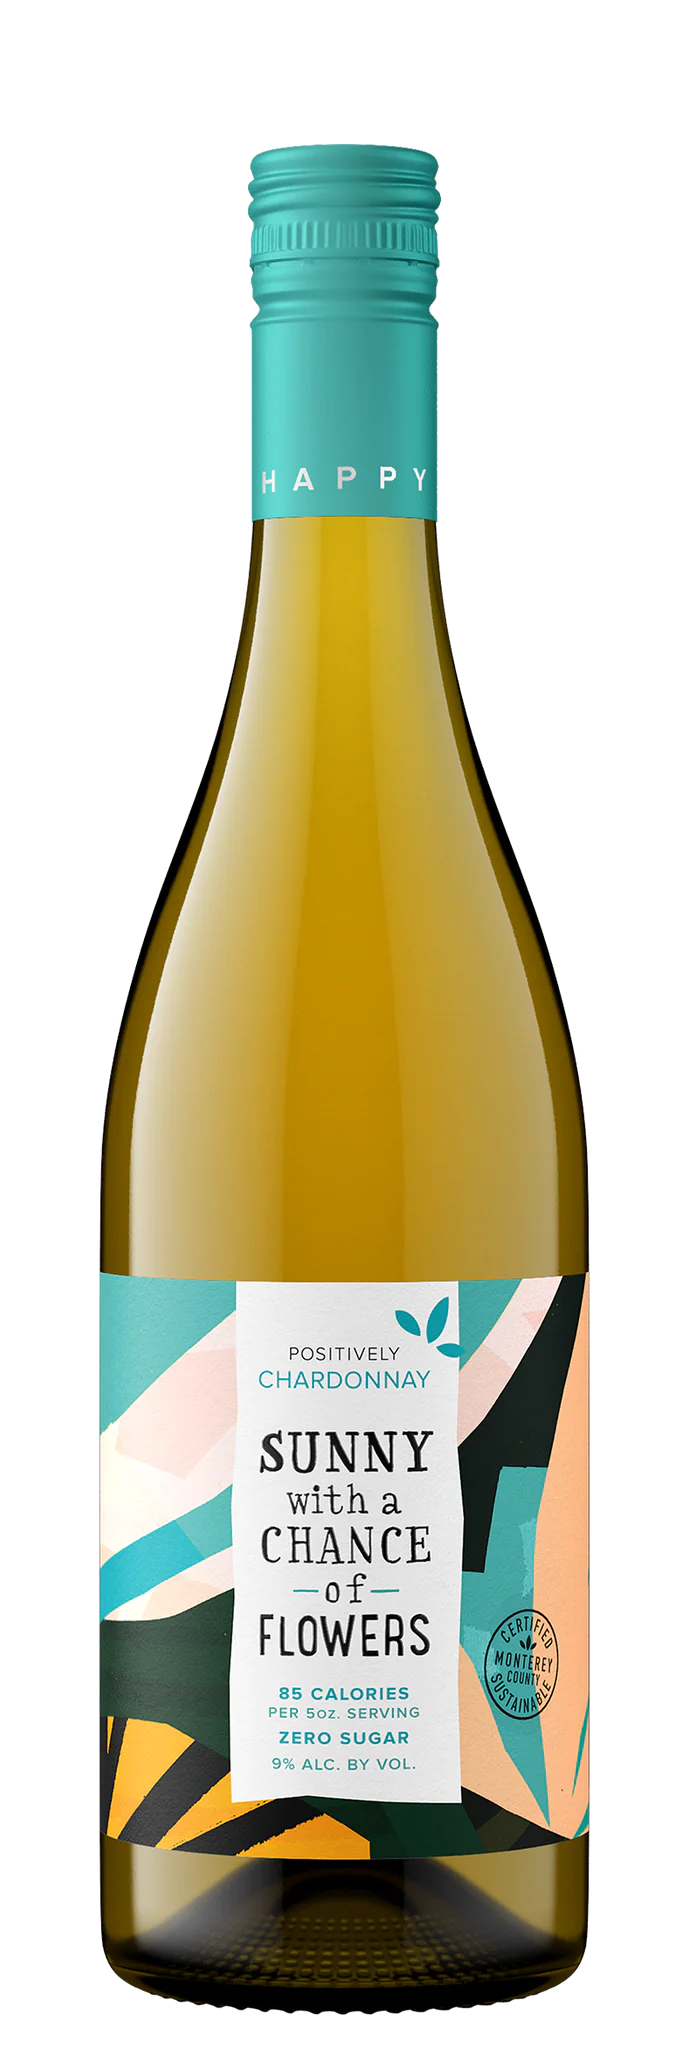 Sunny with a Chance of Flowers | Positively Chardonnay - NV